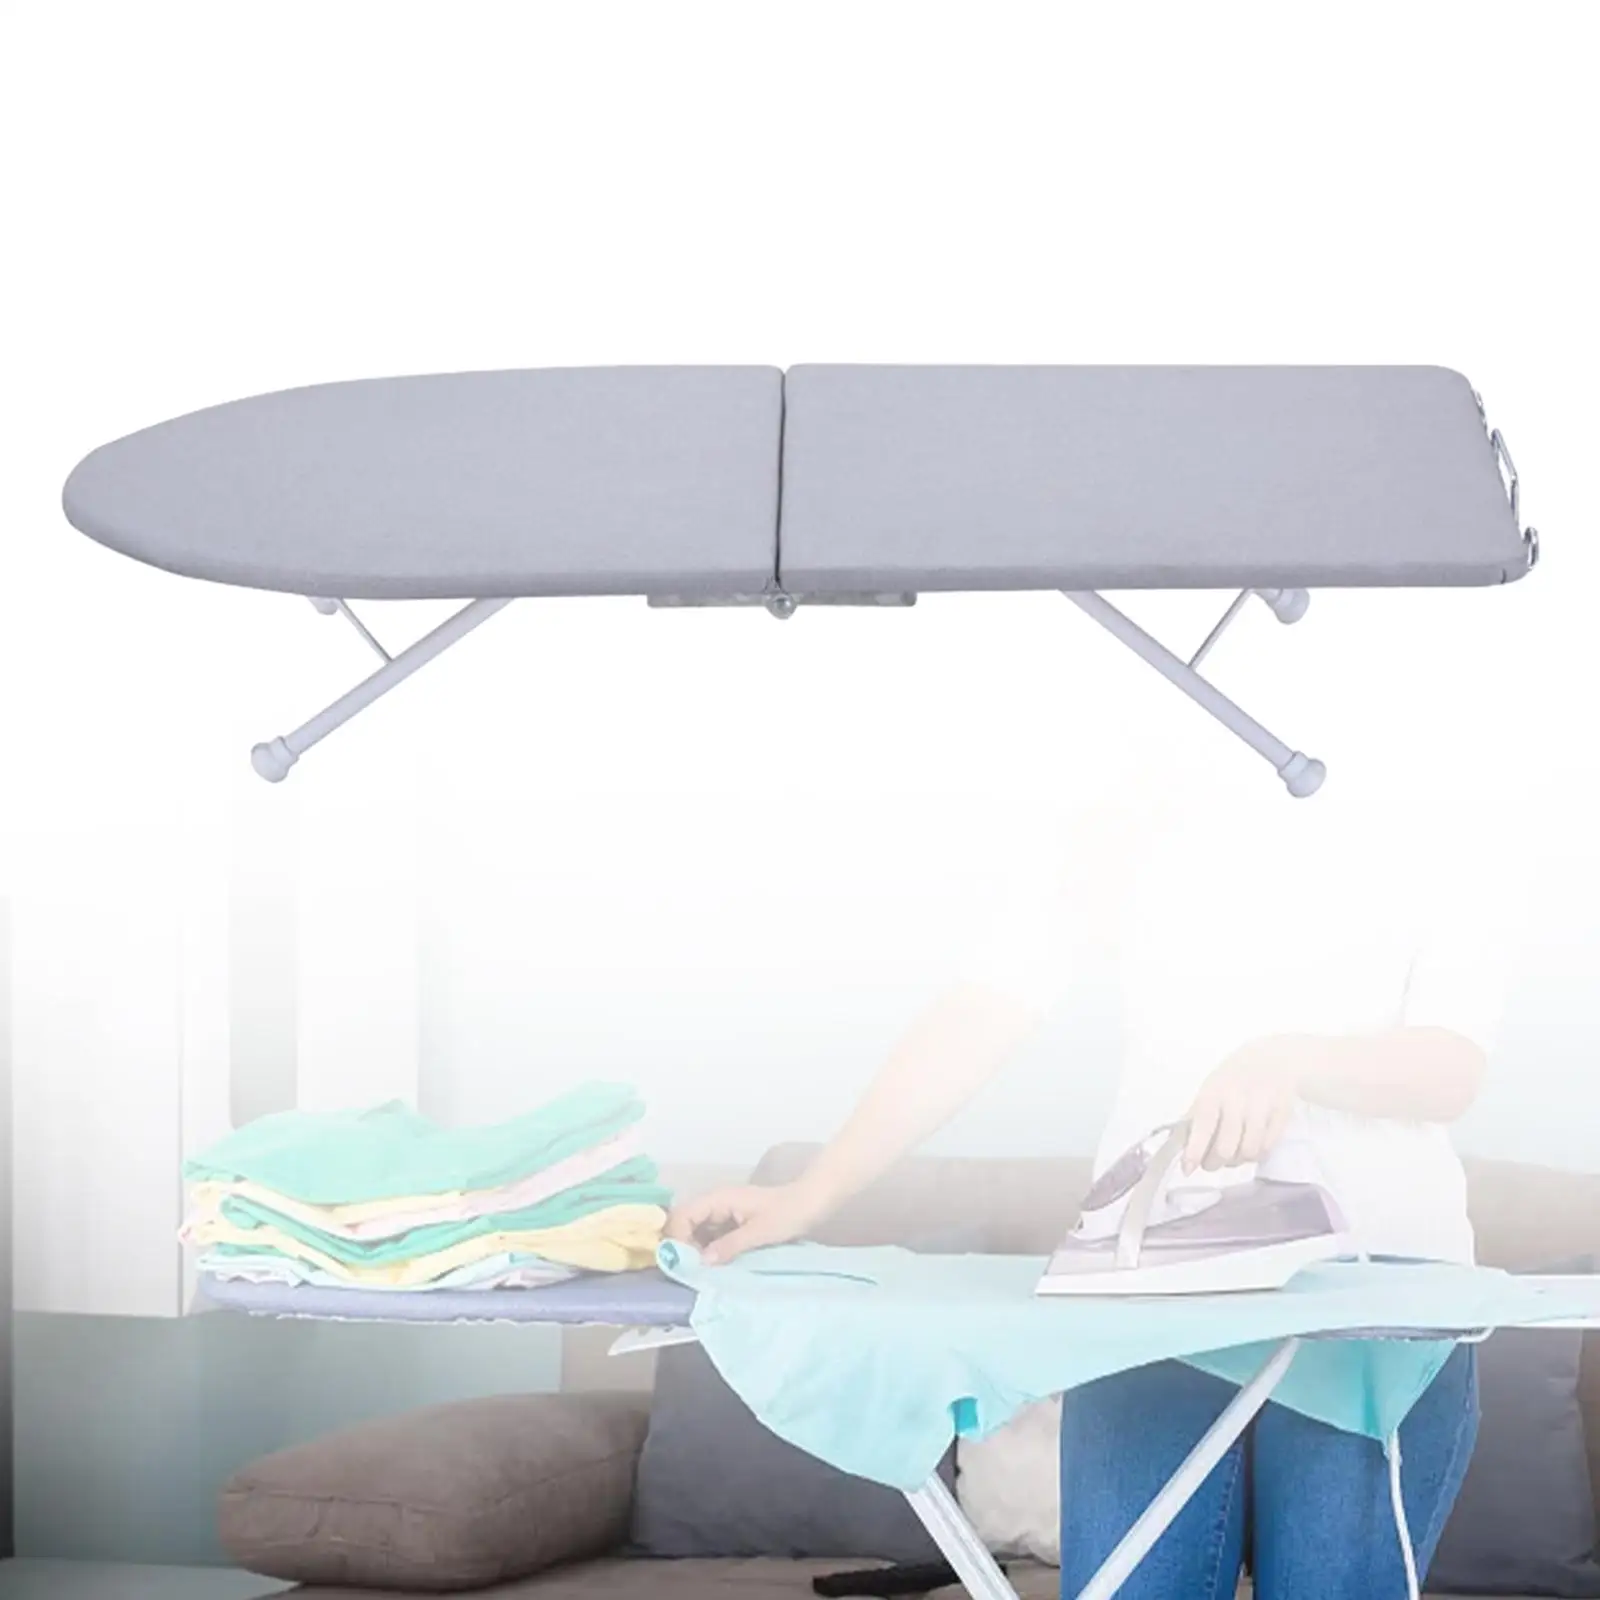 Portable Tabletop Ironing Board with Iron Rest, Compact Ironing Table, Foldable Ironing Board for Household Laundry Room